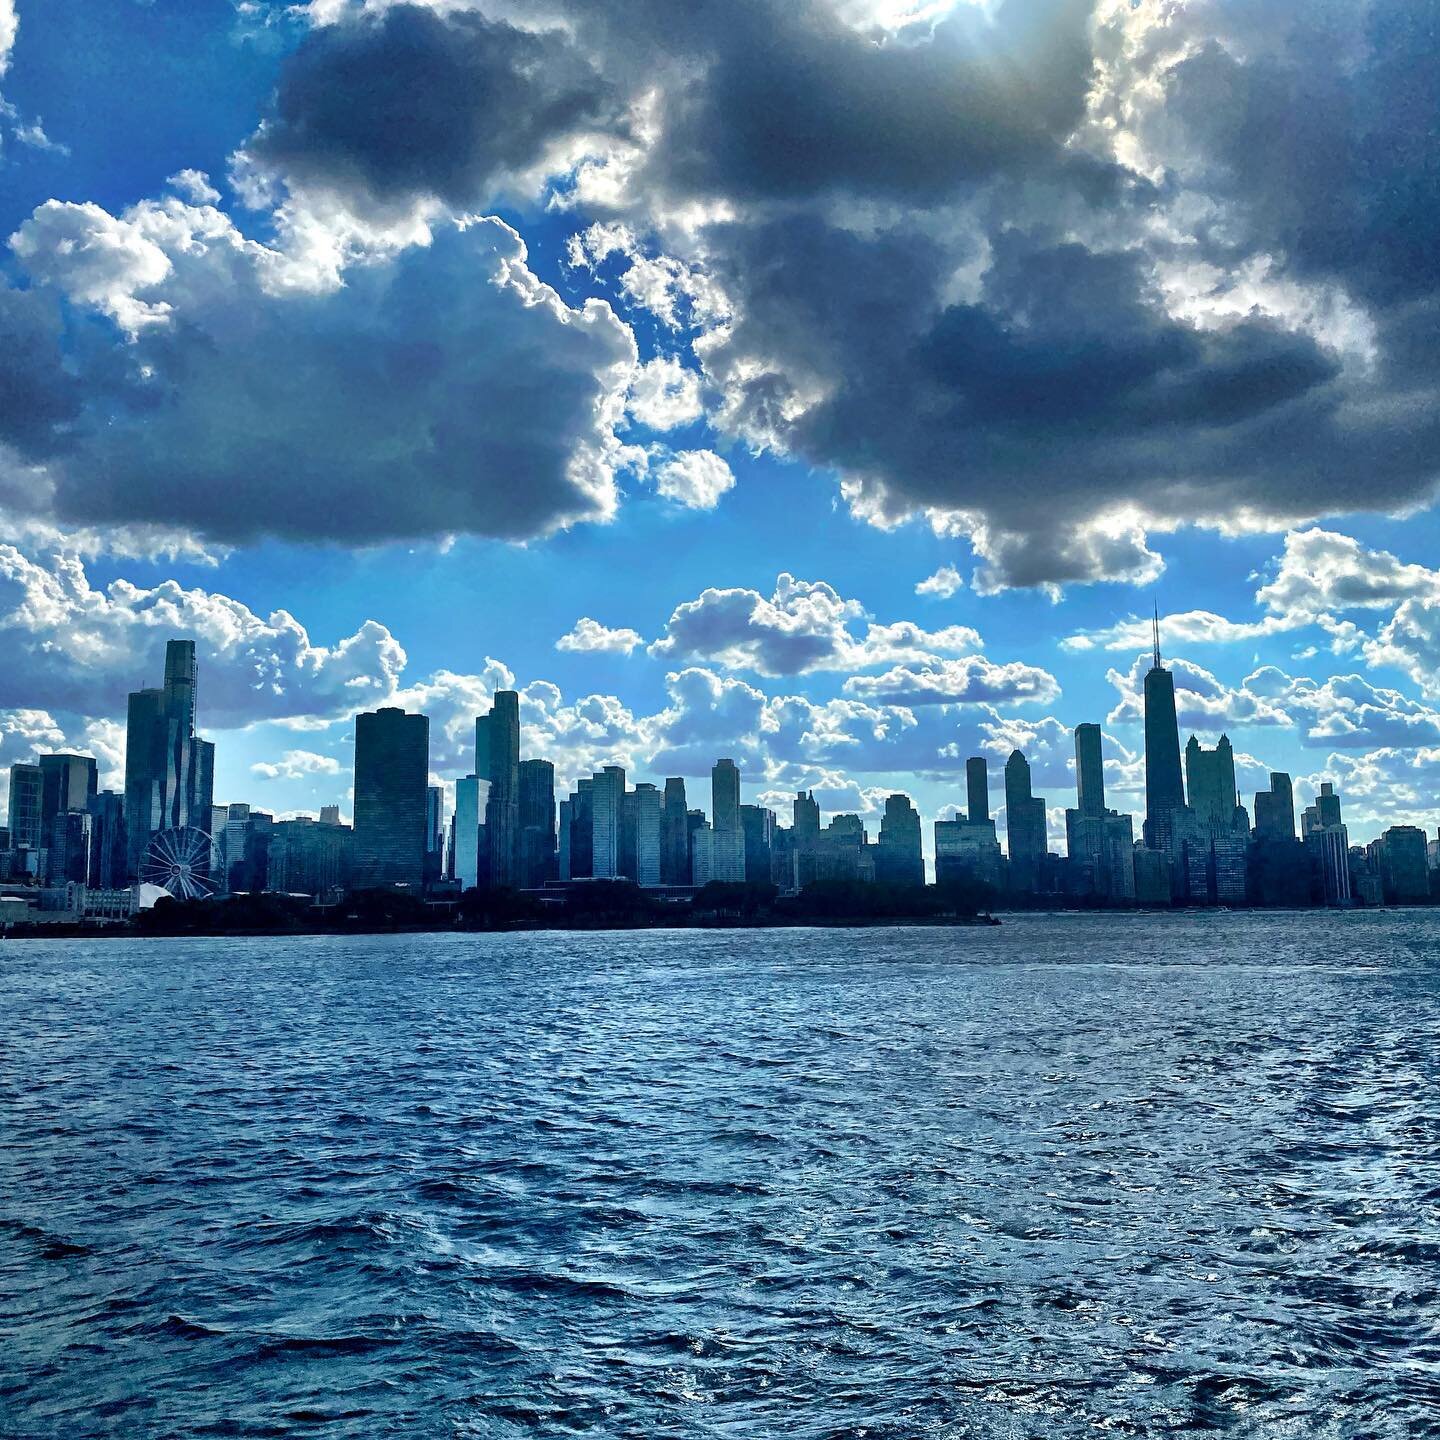 A part of the Chicago skyline seen in silhouette from a boat on Lake Michigan . 5.17 PM . July 10 2020 .